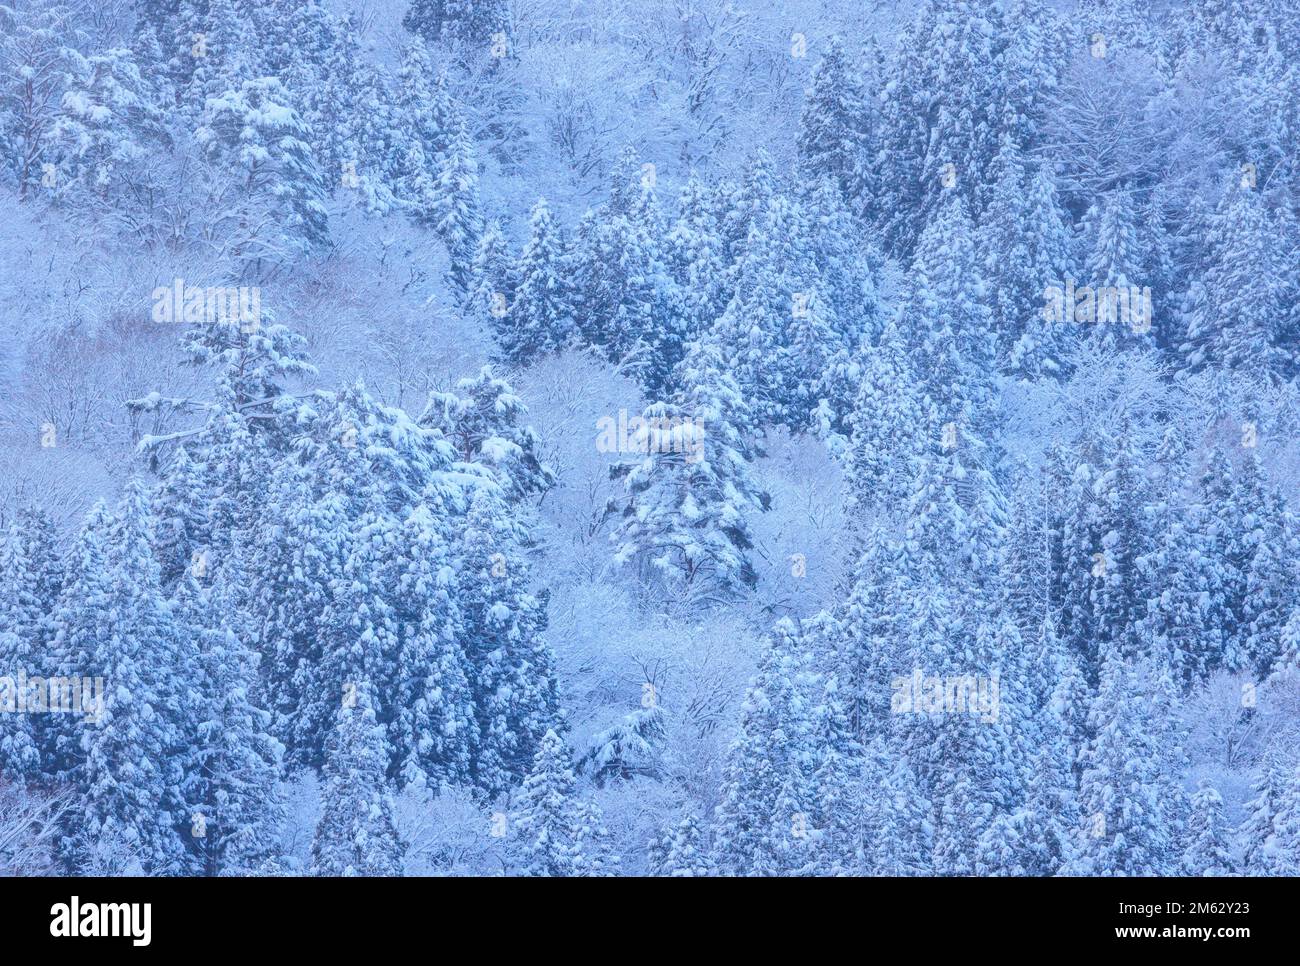 Snow covered trees in white winter landscape Stock Photo